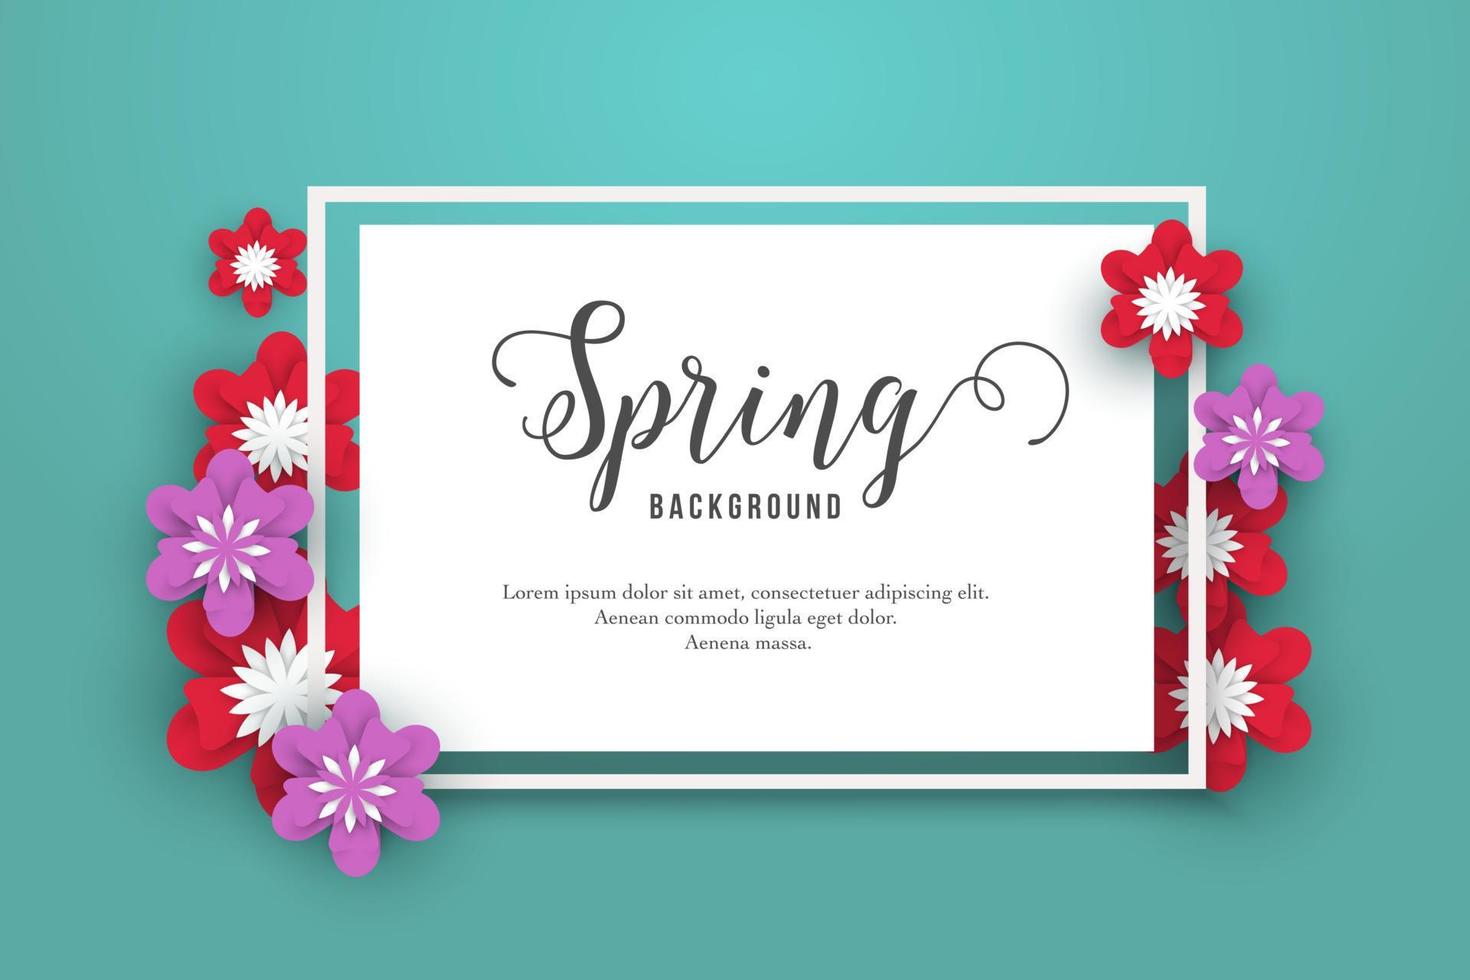 Spring background with red and purple paper flowers on blue background vector